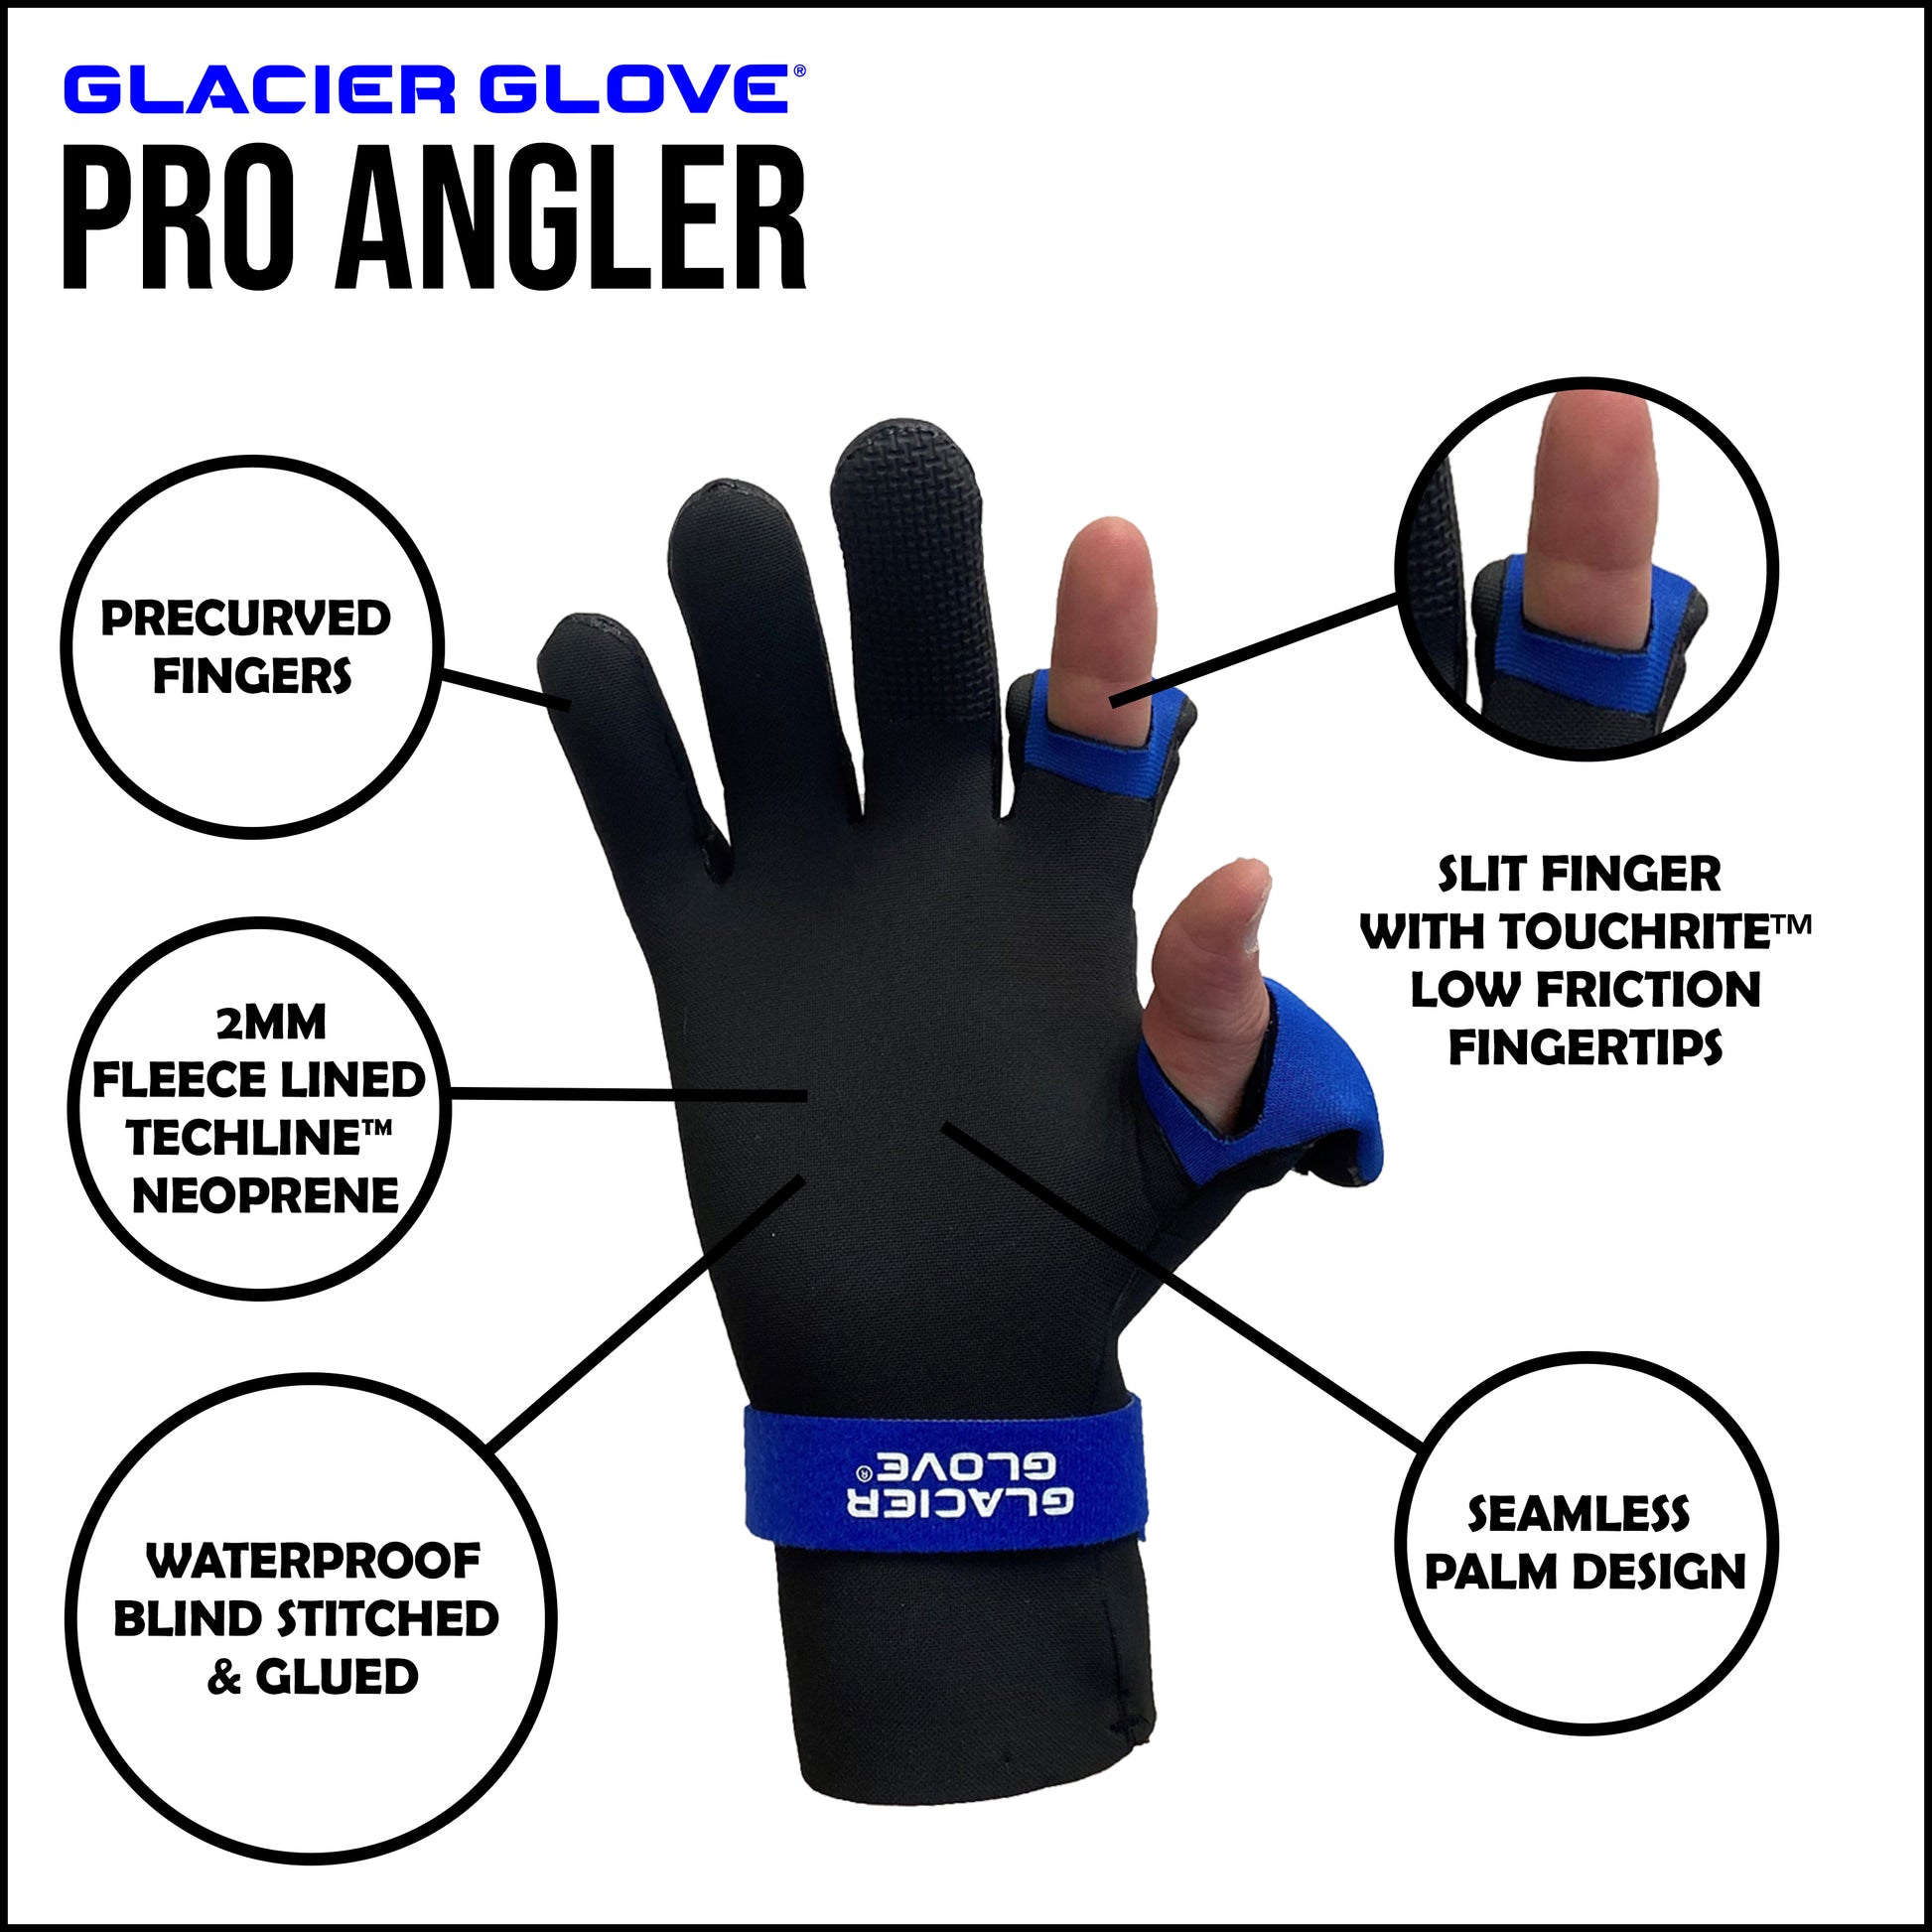 As one of our most functional cold weather fishing gloves, the Pro Angler is designed with a slit index finger and thumb for easy casting and knot tying. Its dexterity combined with warmth and comfort makes this glove the perfect choice for cold, wet conditions.